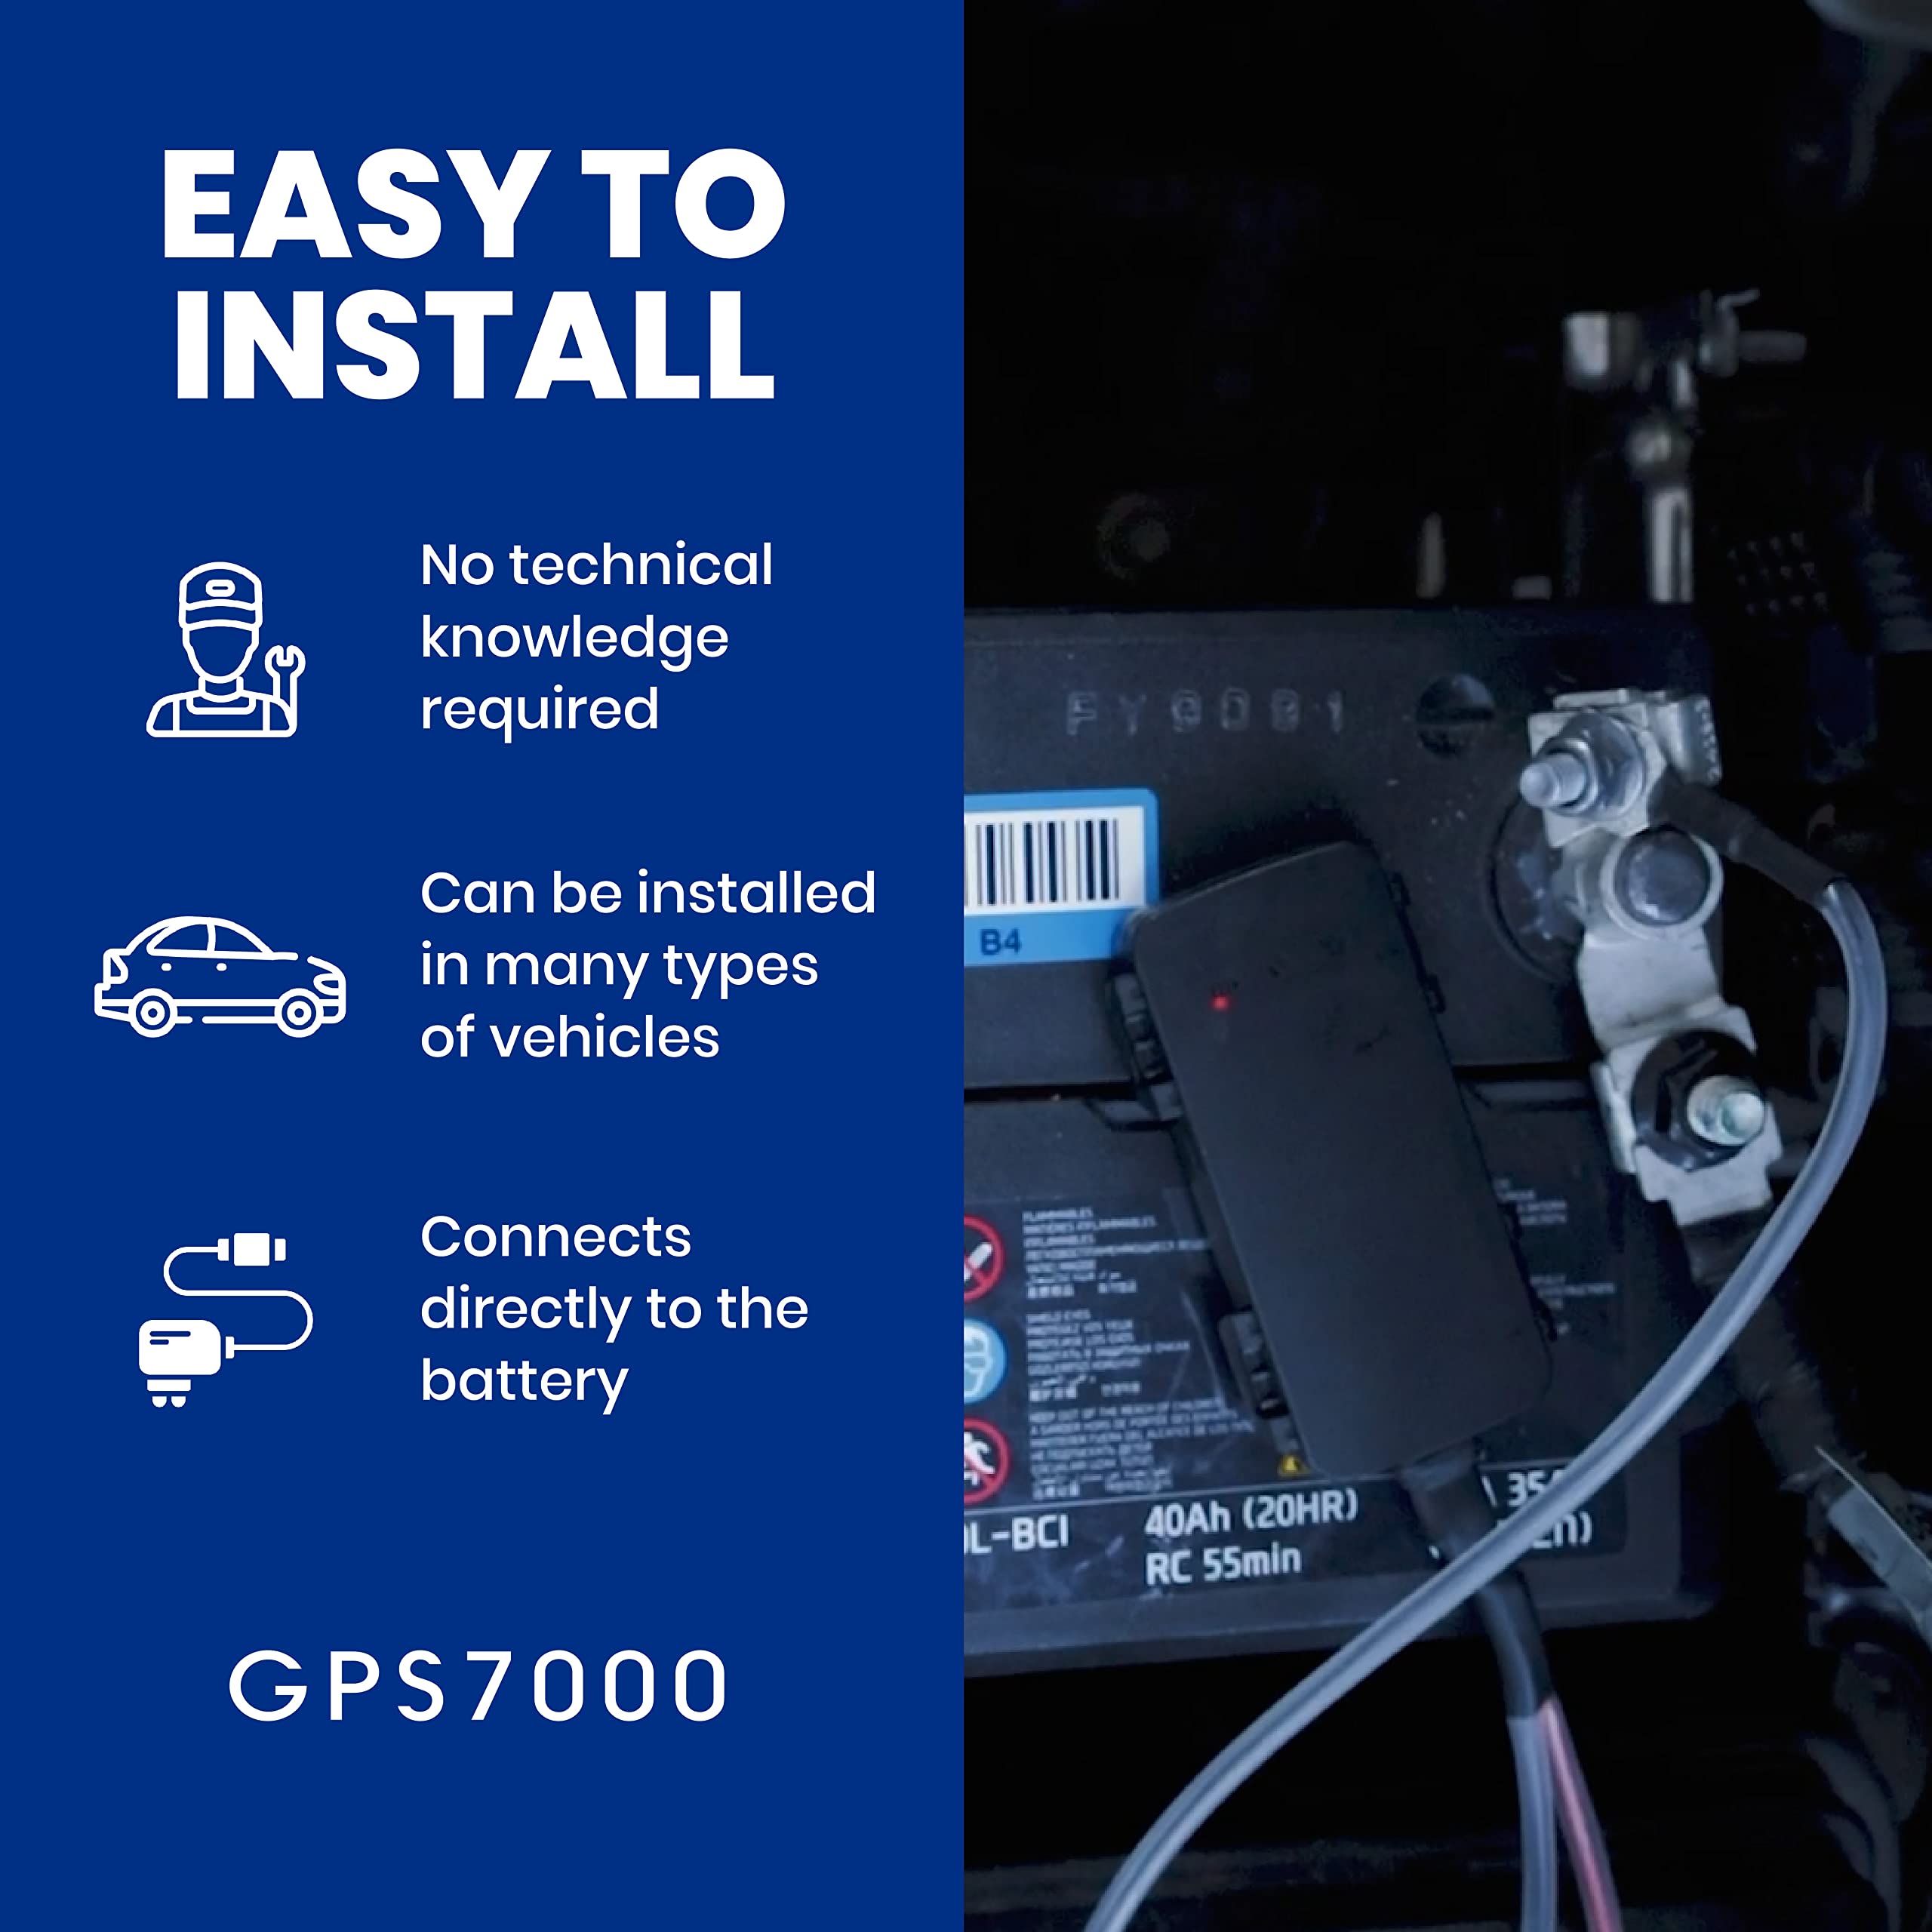 GPS7000 G1-4G LTE Fleet Management Device with Easy Installation. Includes 60 Days of Service